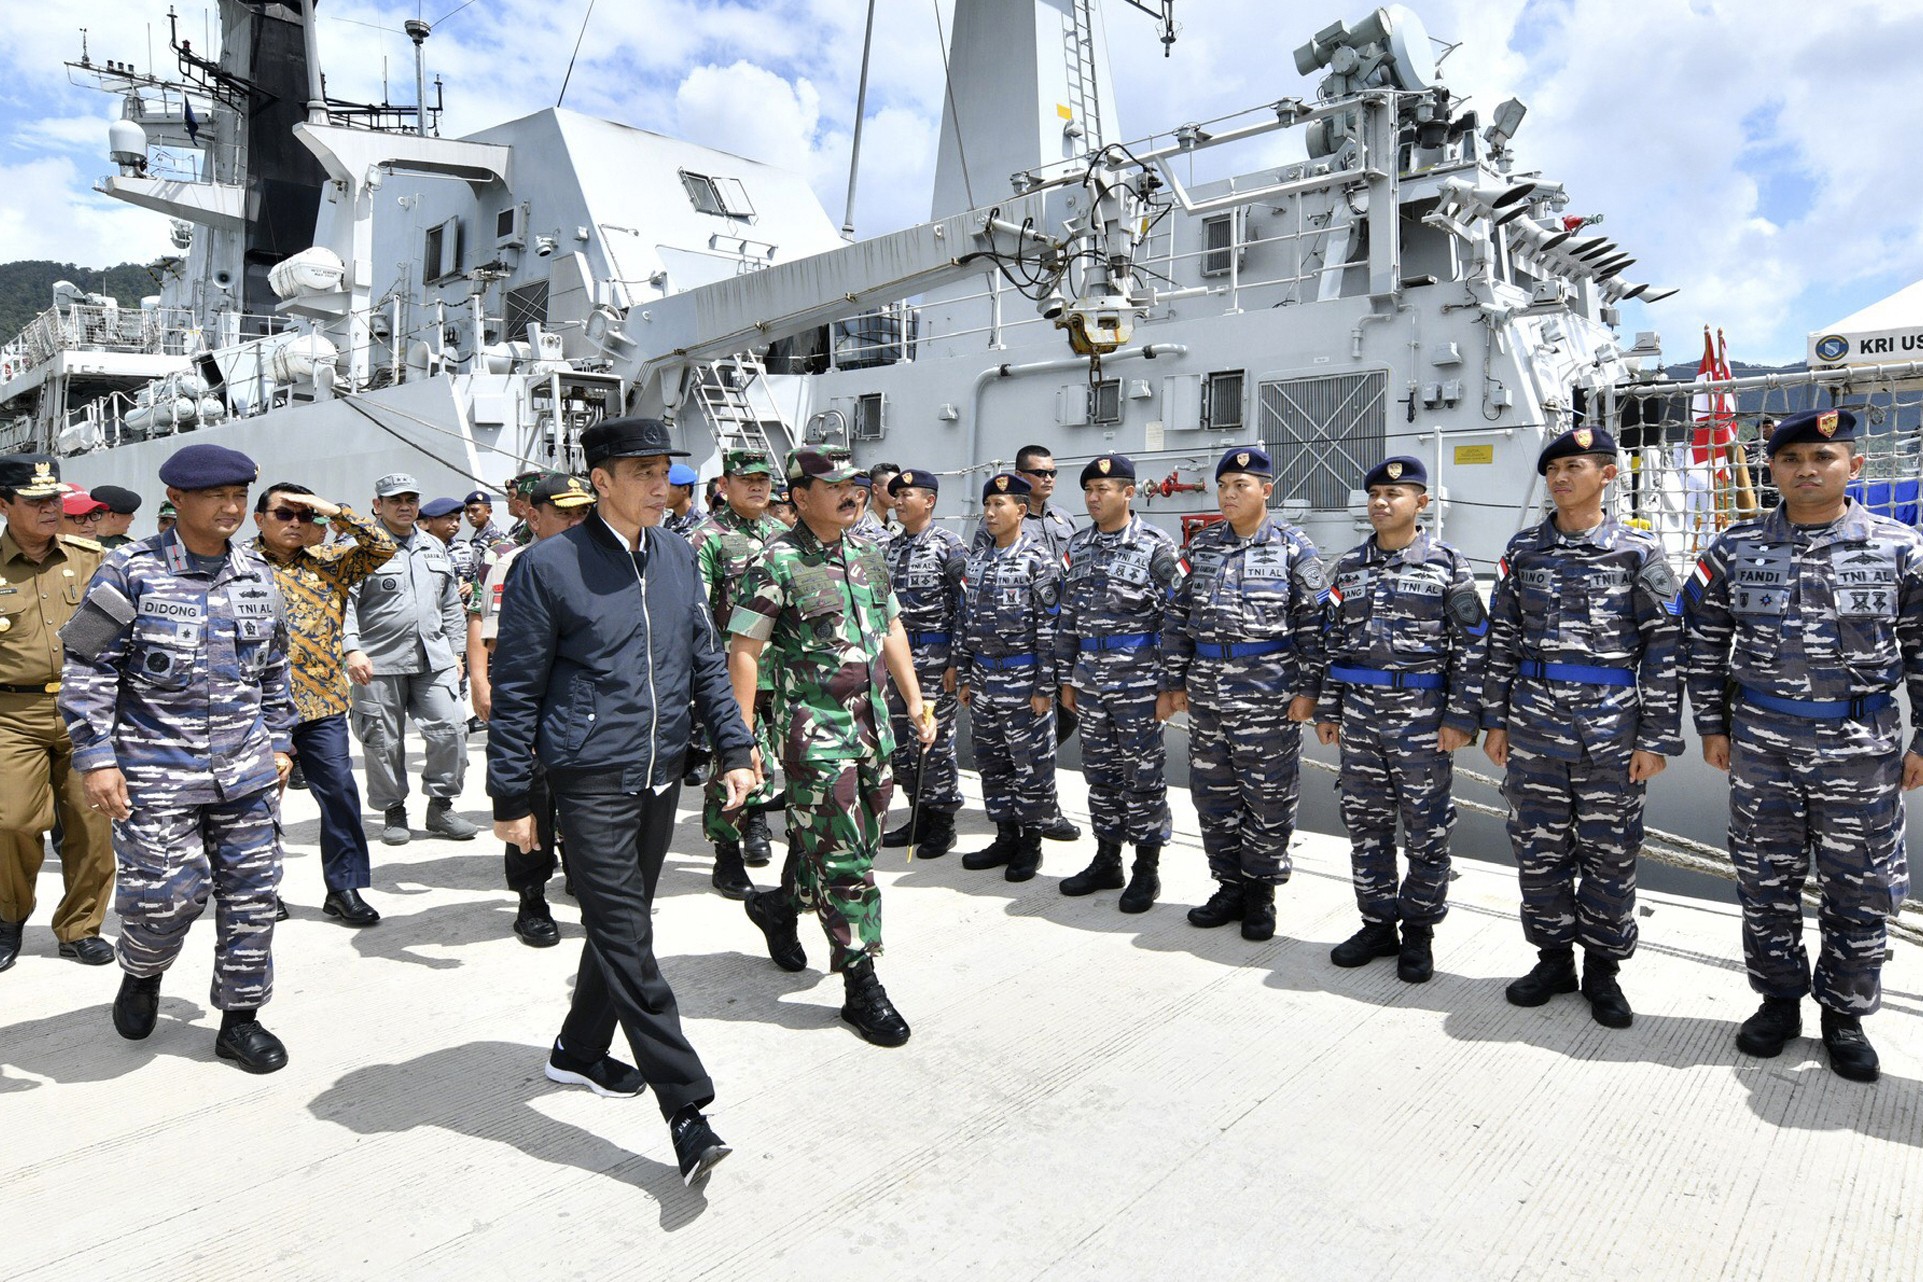 Indonesian President Joko Widodo, left, inspects troops during a visit to the Natuna Islands on January 8, 2020. Photo: Handout via AP